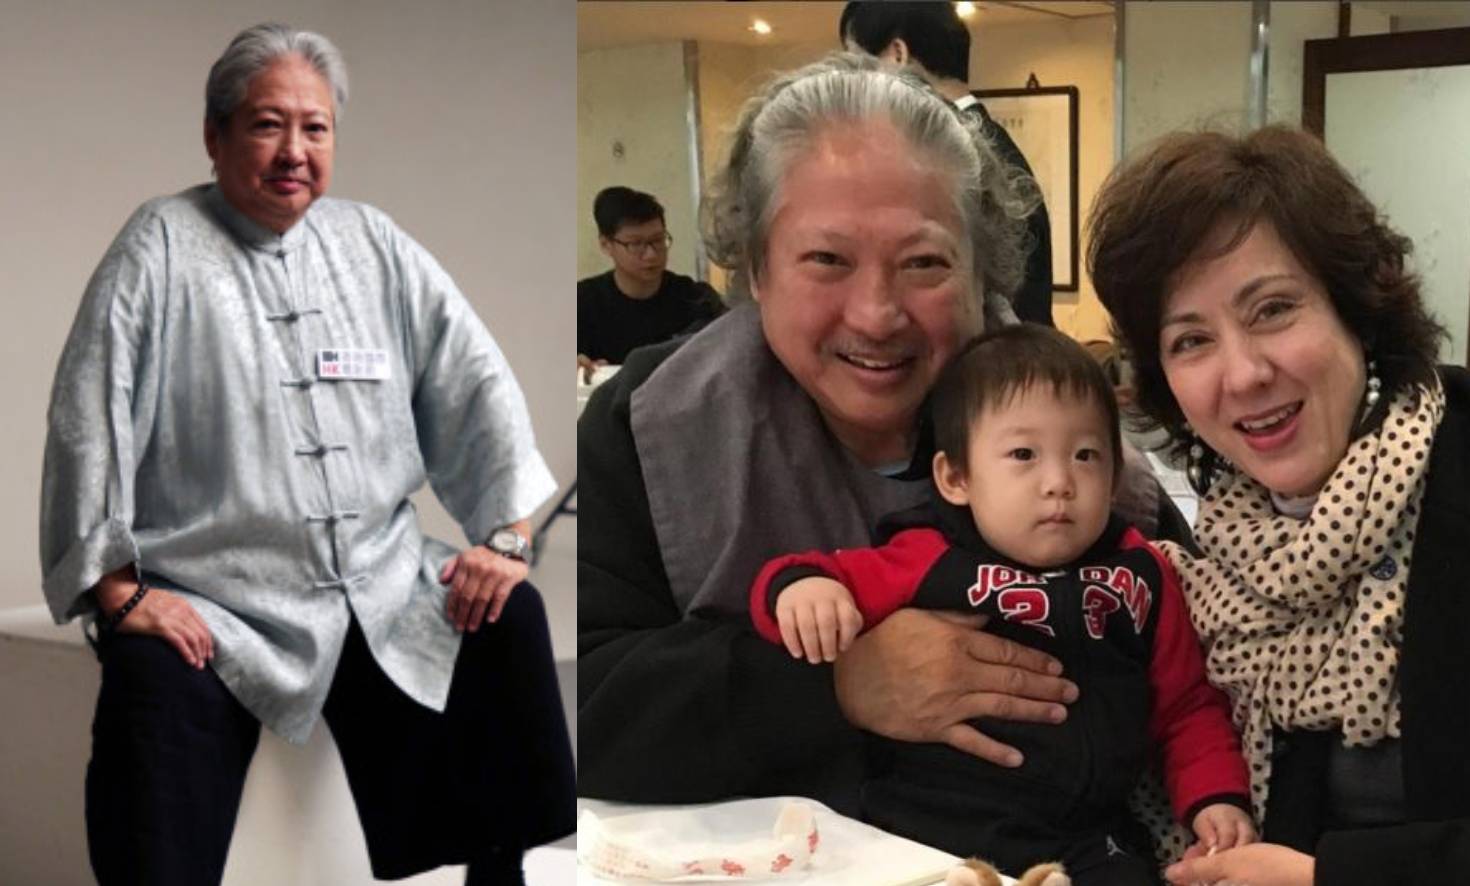 Sammo Hung Says His Wife Is "Very Irritating" … But He Can’t Do Without Her